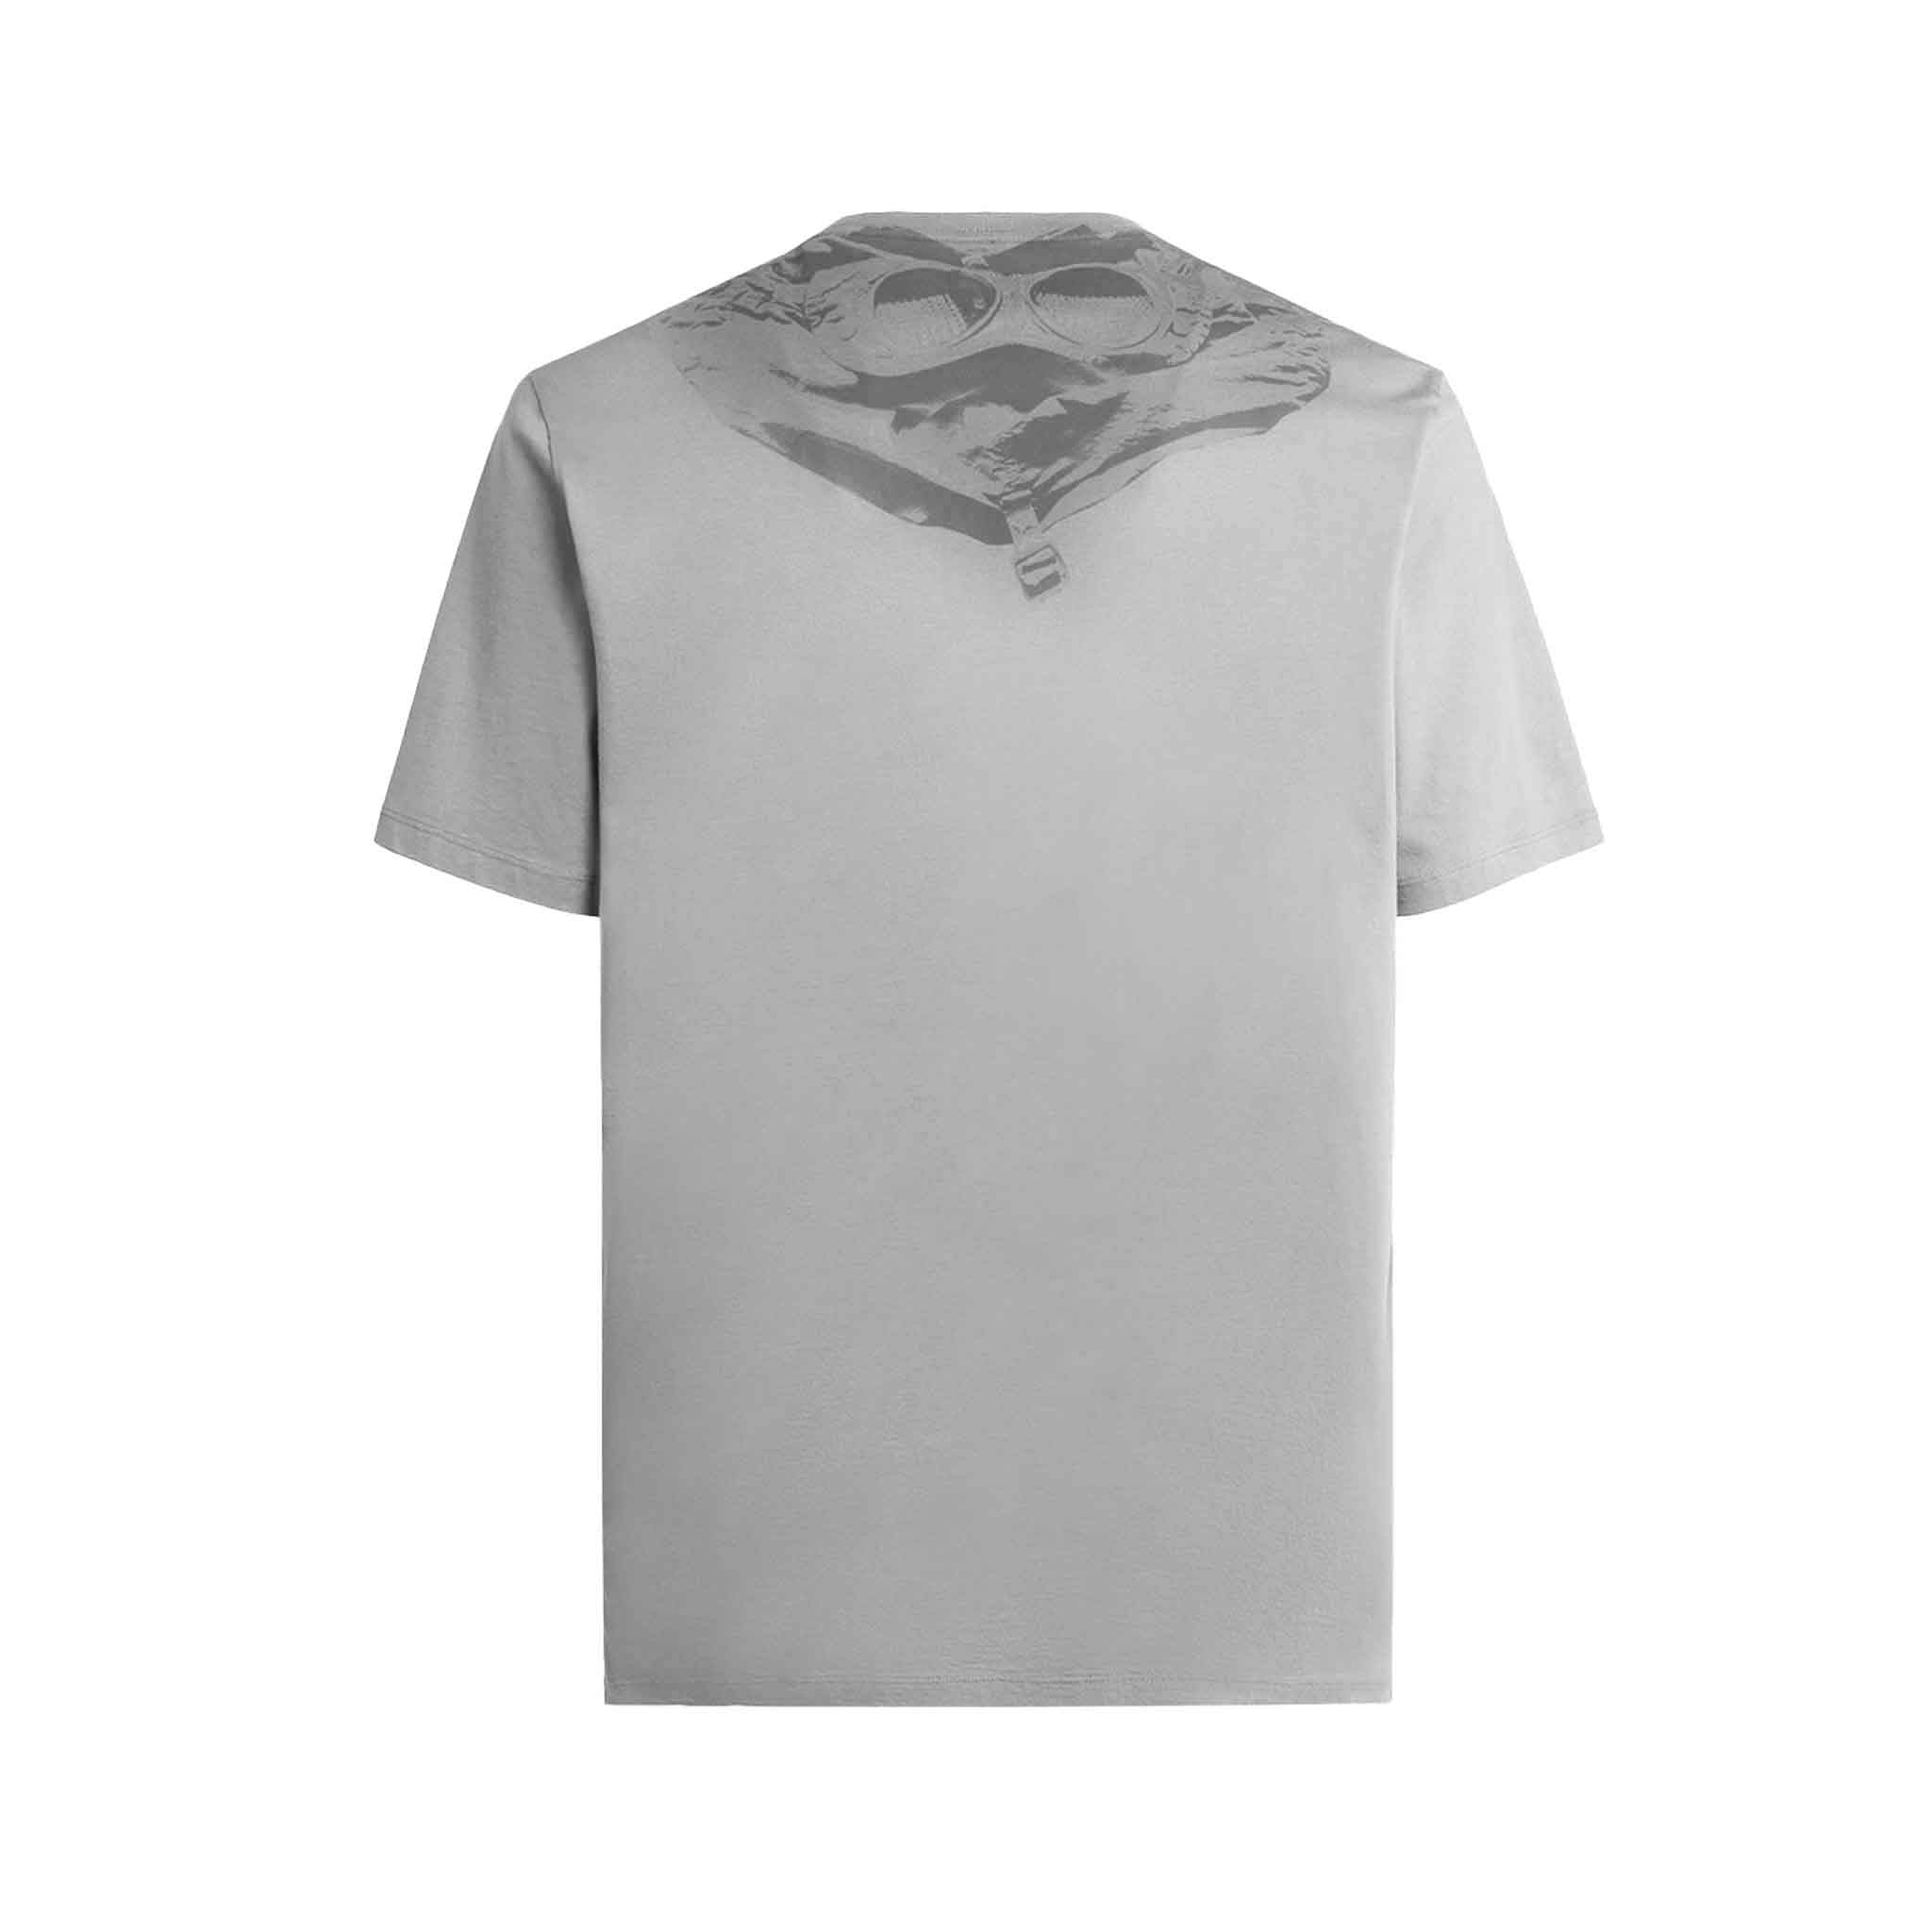 C.P. Company 30/1 Jersey Goggle T-shirt in Drizzle Grey